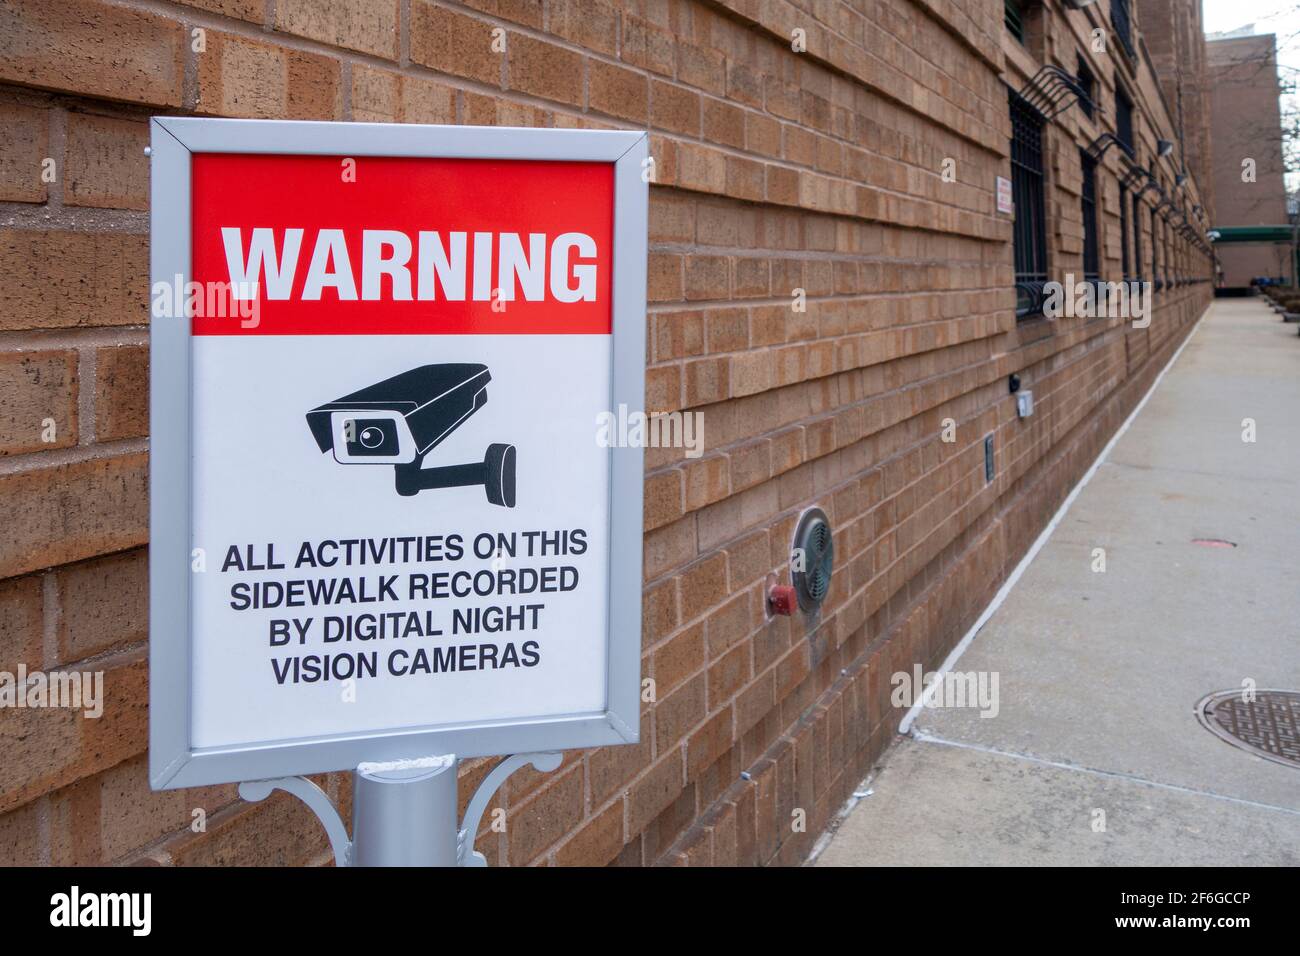 Private security cameras warning notice  sign warning All activities on this sidewalk recorded by digital night vision cameras Stock Photo